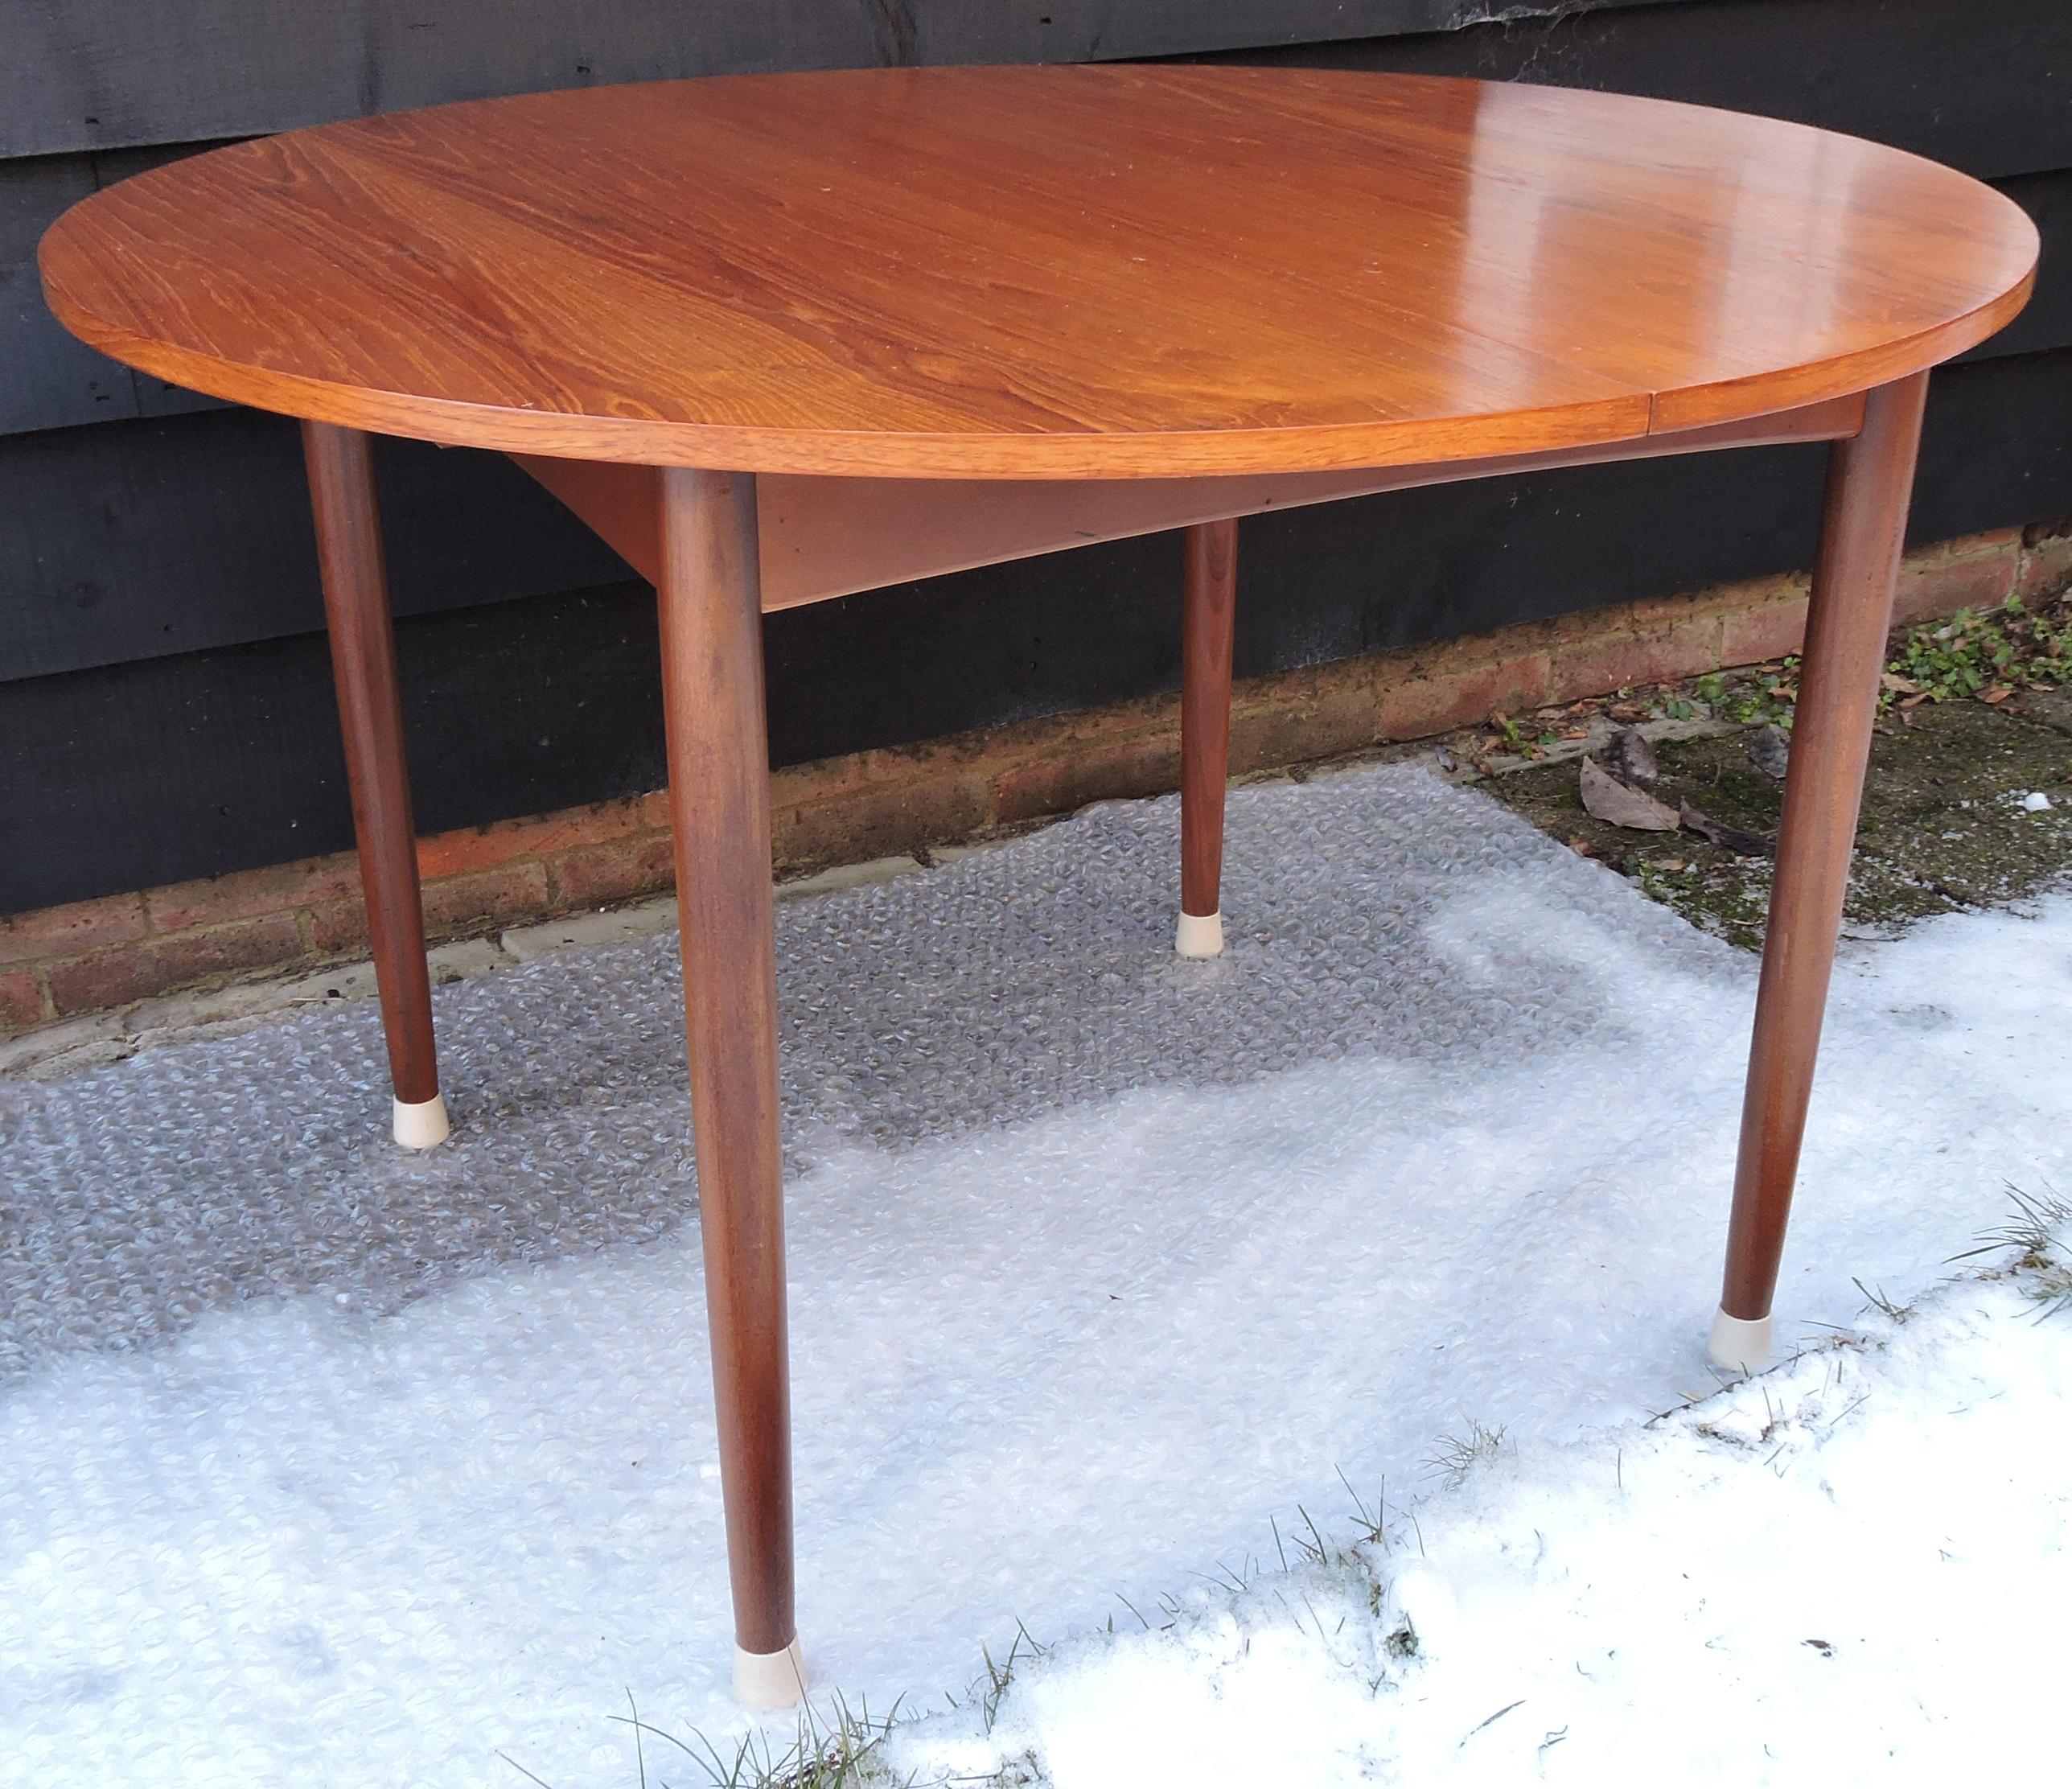 1960s dining table